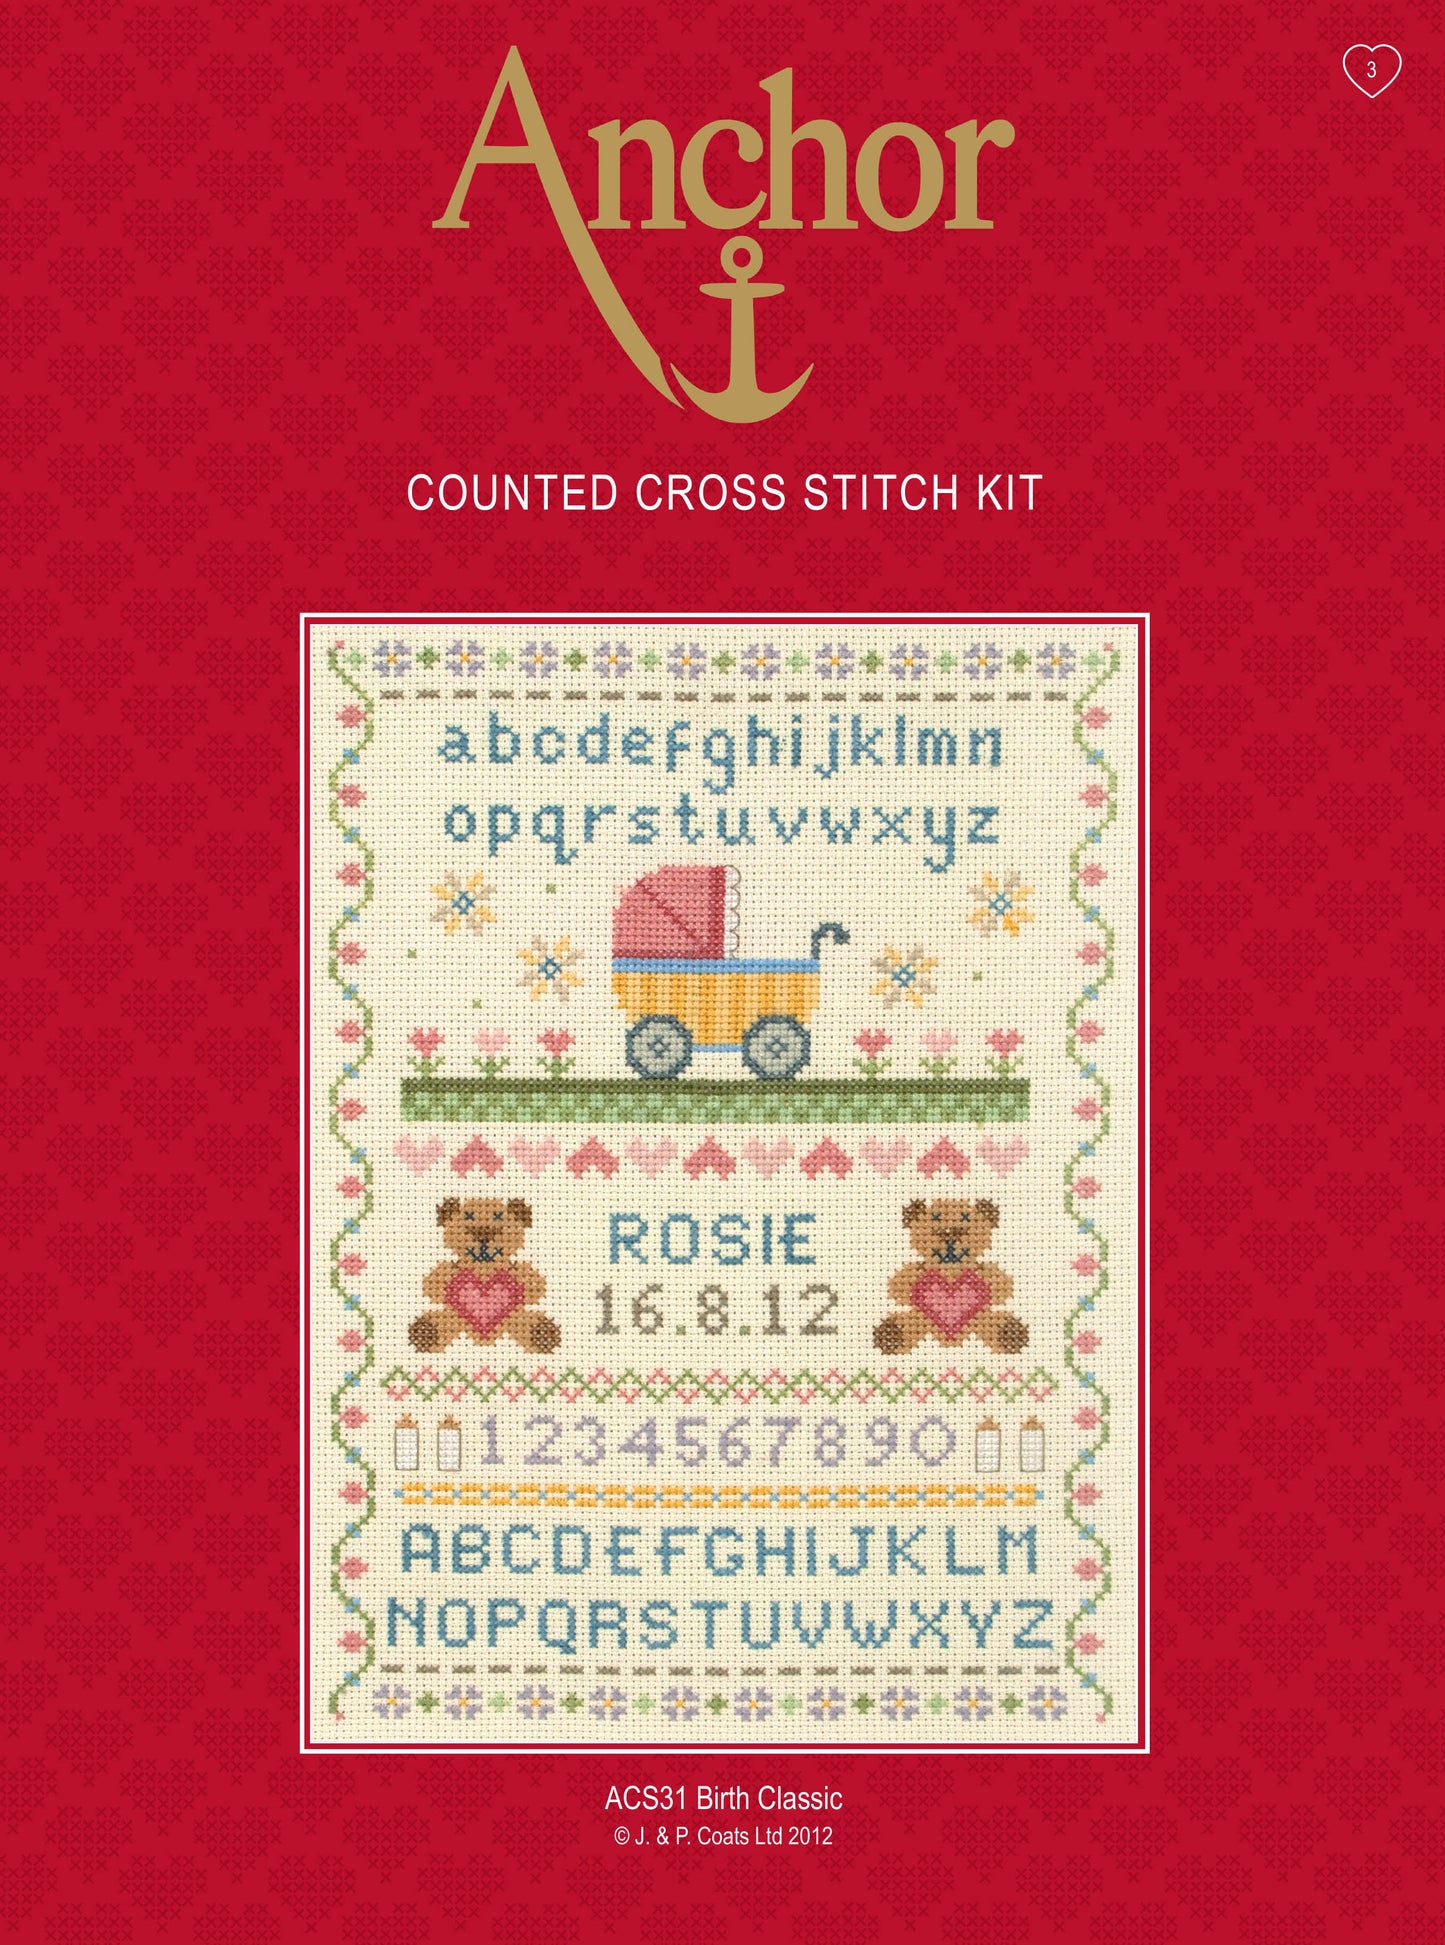 Anchor Counted Cross Stitch Kit Birth Record Classic